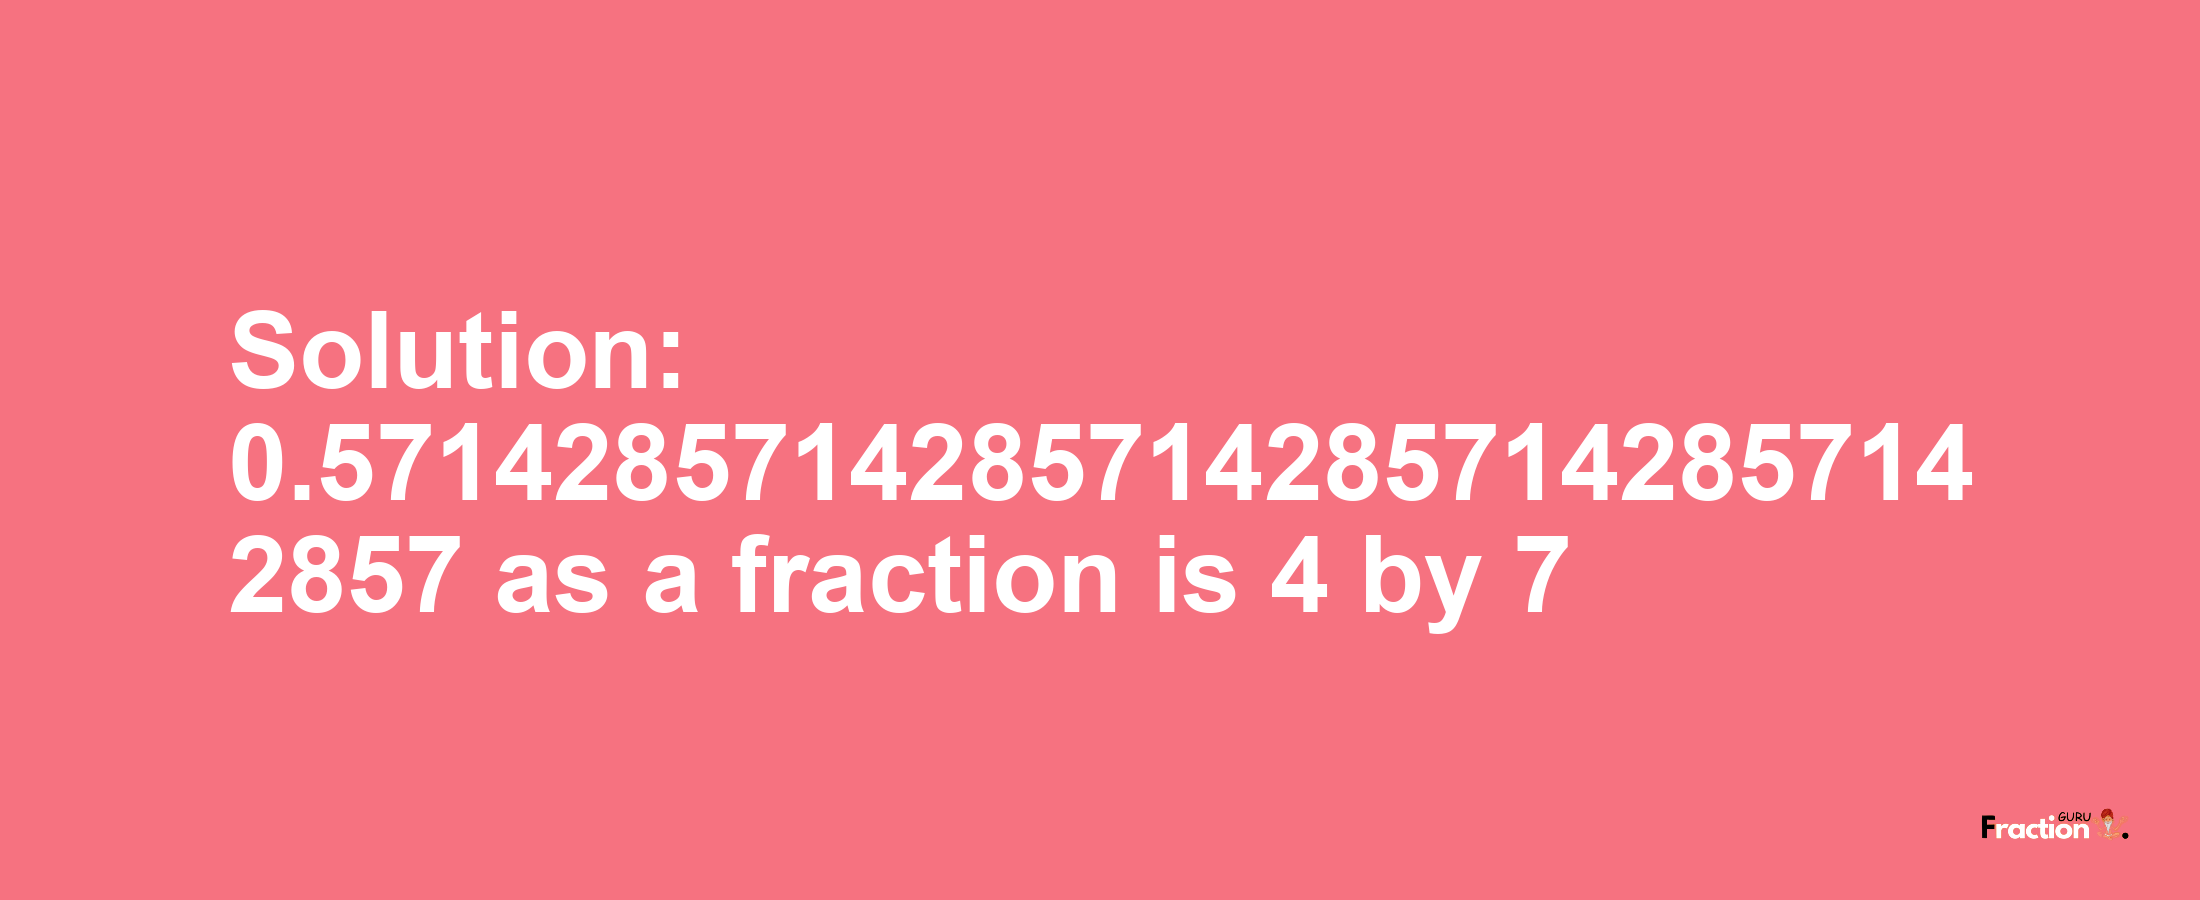 Solution:0.57142857142857142857142857142857 as a fraction is 4/7